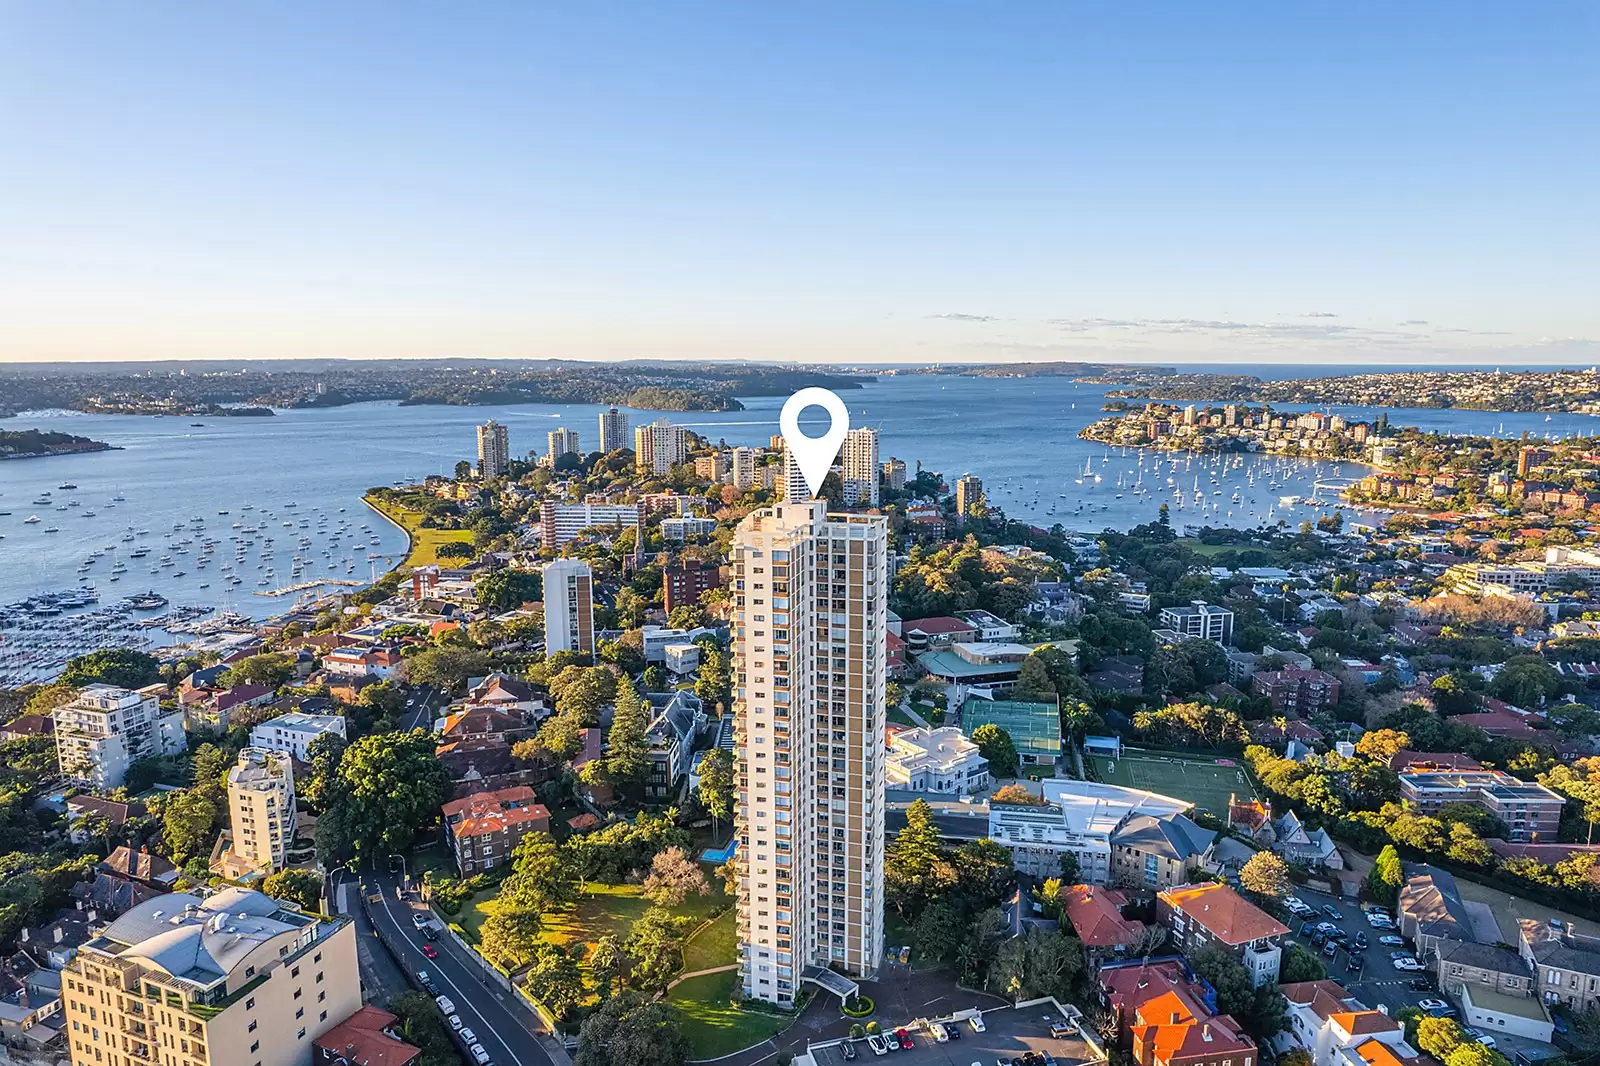 Photo #14: 2E/3 Darling Point Road, Darling Point - Sold by Sydney Sotheby's International Realty